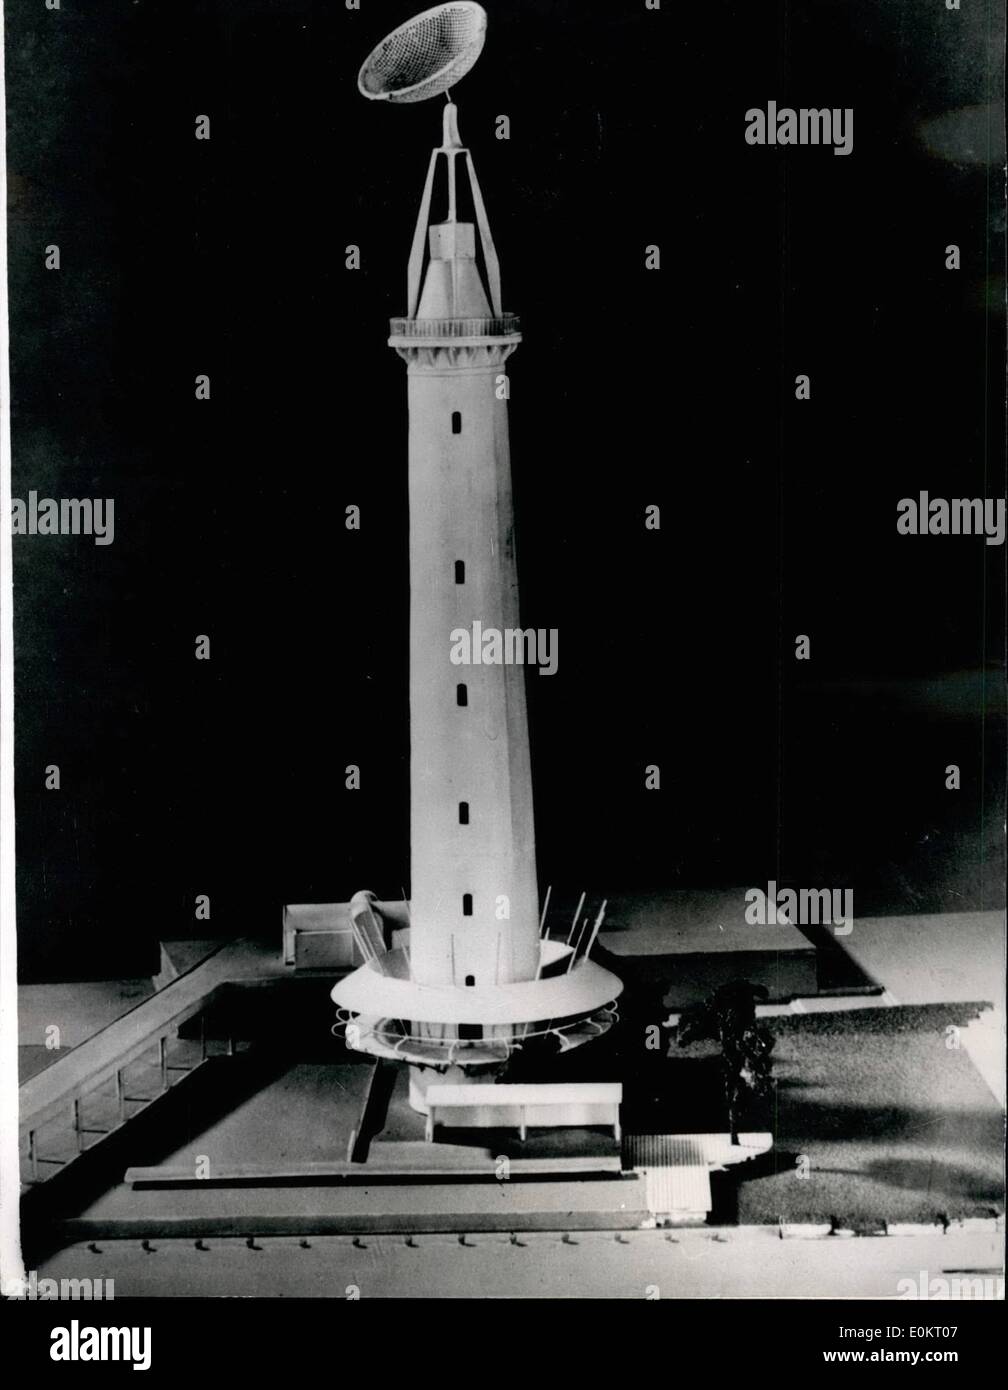 Nov. 11, 1949 - Things To Come With The 1951 Festival Of Britain Model Of Proposed Treatment For The Shot Tower: Visitors to the 1951 Festival of Britain on South Bank of the Thames will be able to signal the moon. The shot tower - famous London landmarks built for making lead short by dropping molten metal into water - is to be fitted with a ''radio telescope''. Through this visitors will be able to see - and hear - radio waves from the Universe,. The radio telescope will be operated by remote control from another part of the exhibition. All the visitors will have to do is press a button Stock Photo